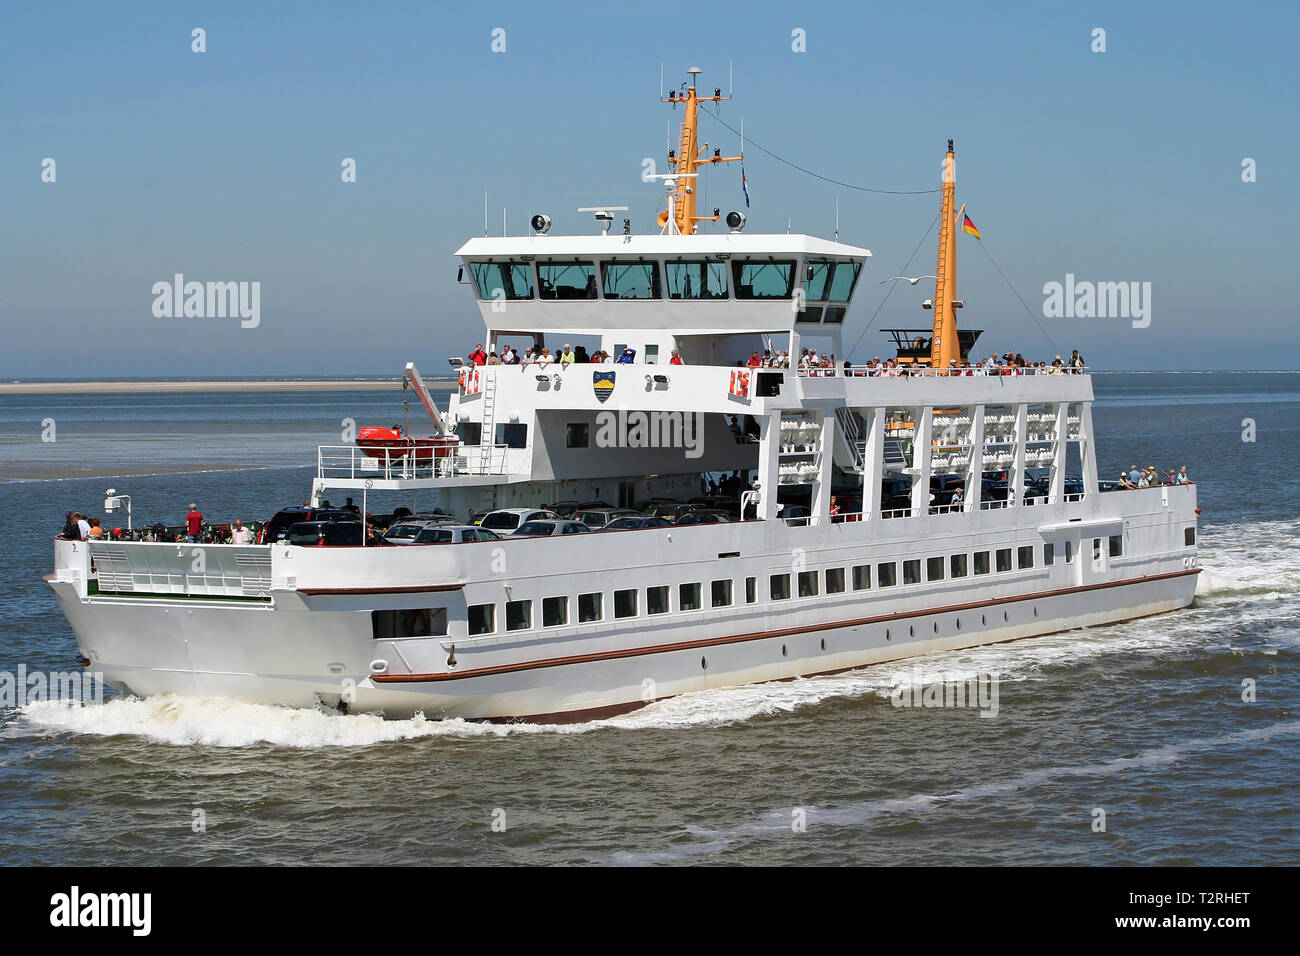 An island ferry in the North Sea Stock Photo